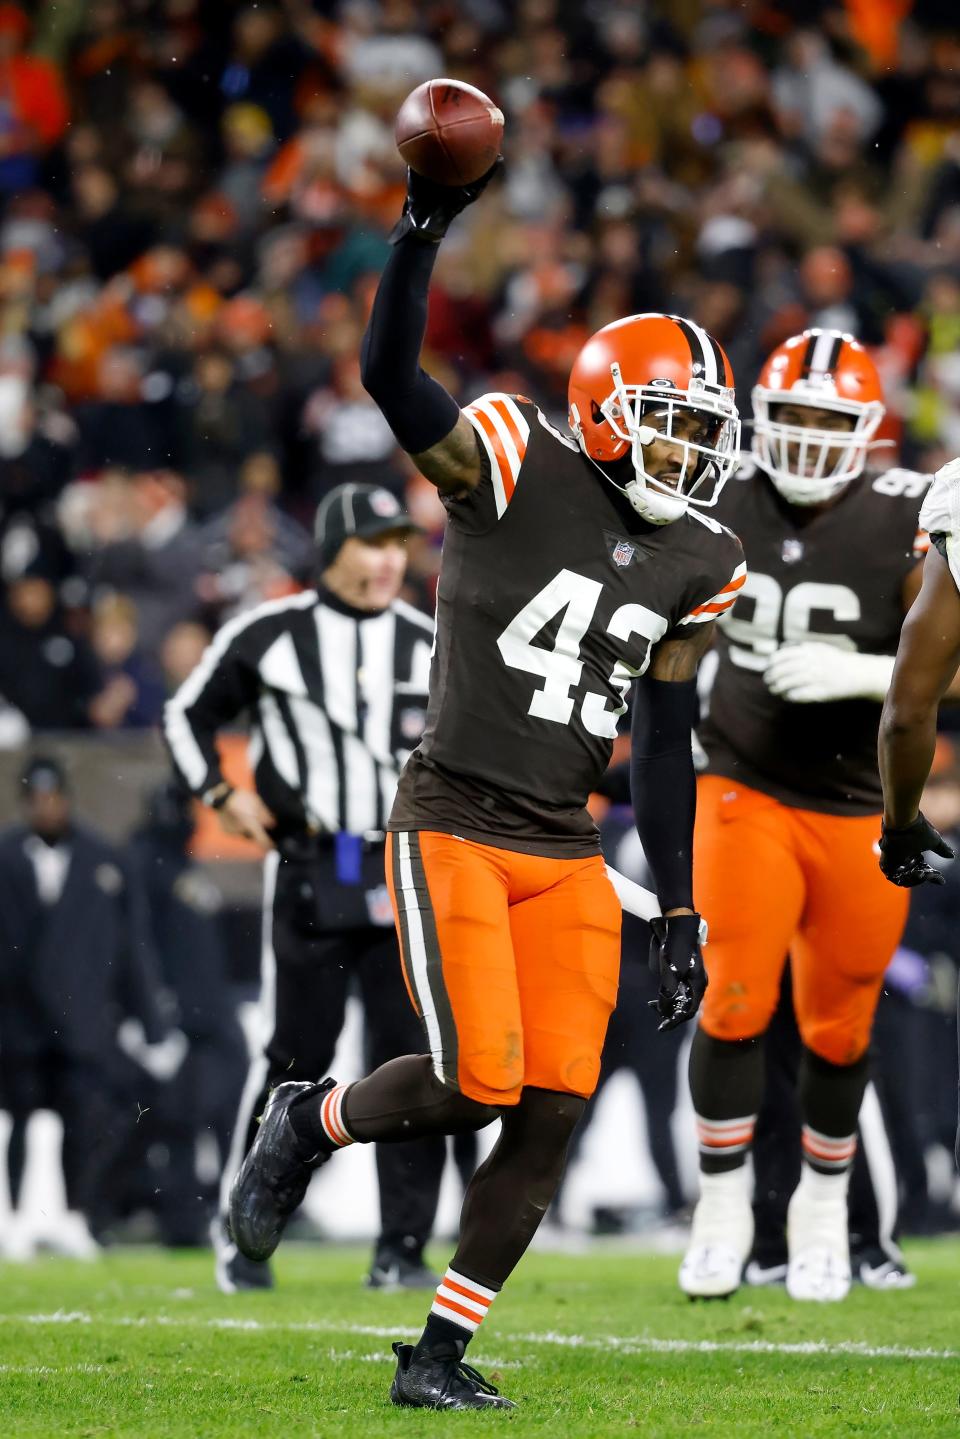 Cleveland Browns safety John Johnson III (43) reacts after recovering a fumble during an NFL football game against the Baltimore Ravens, Saturday, Dec. 17, 2022, in Cleveland. (AP Photo/Kirk Irwin)